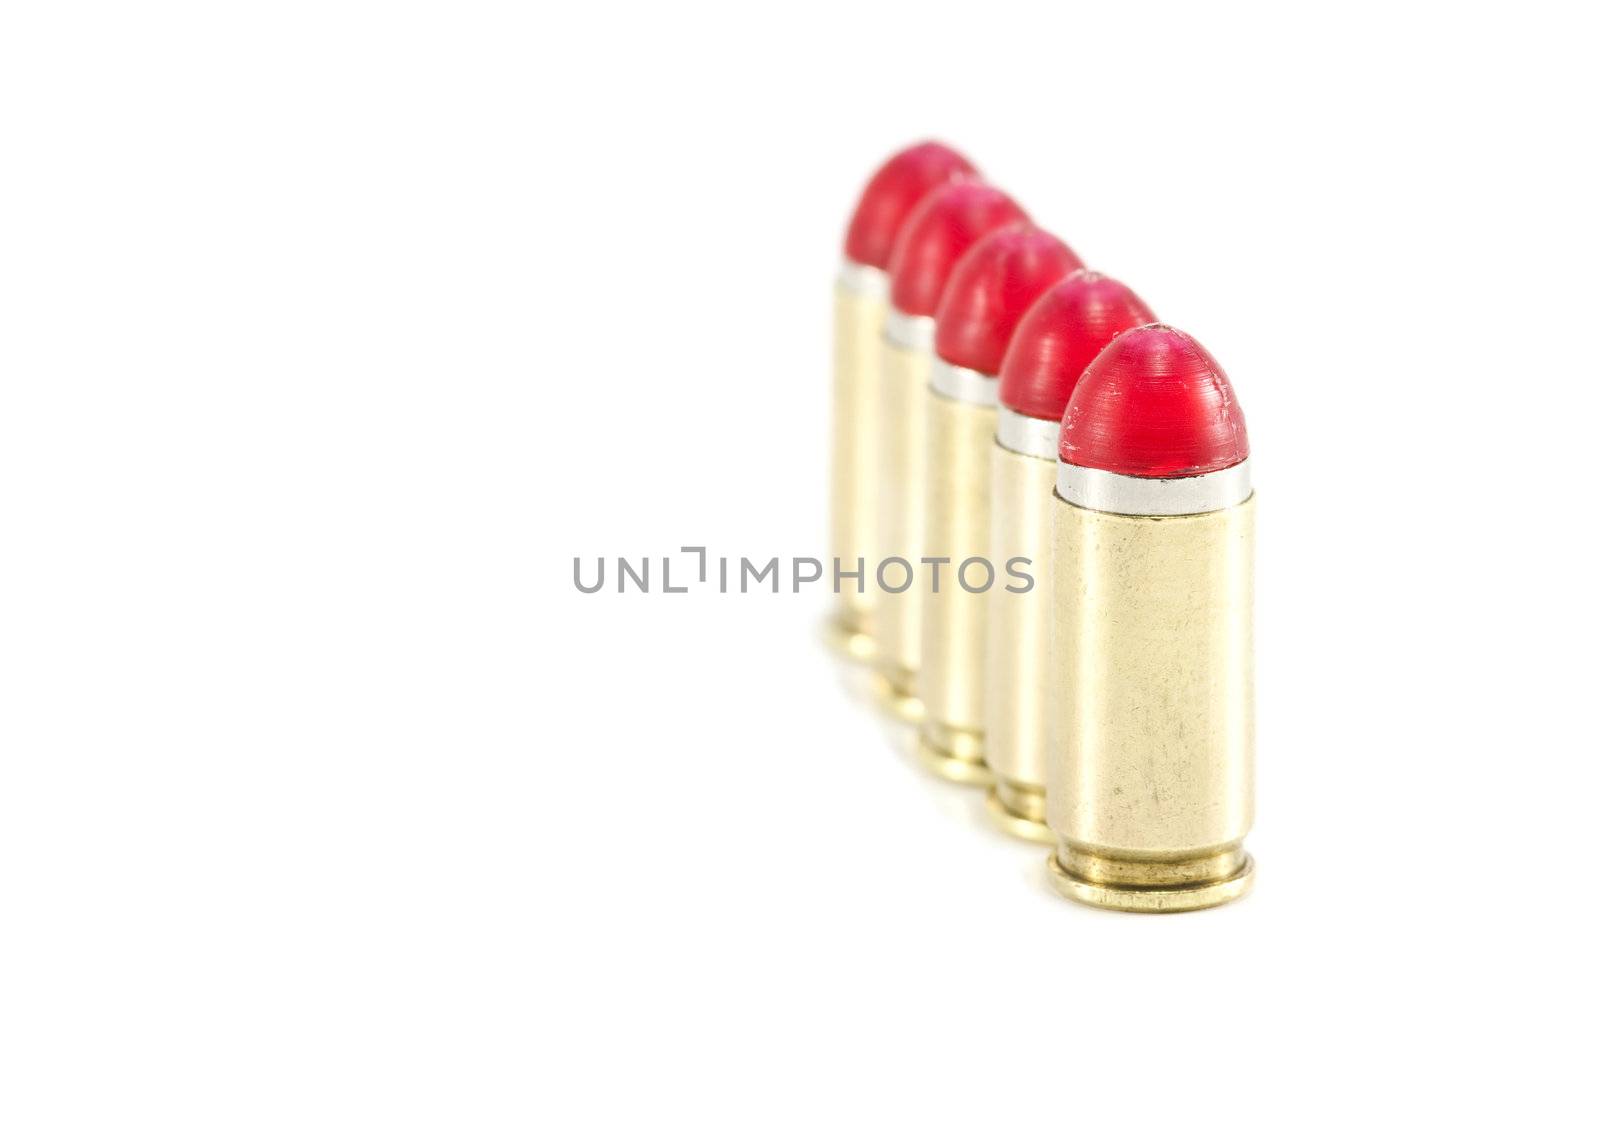 9mm Shock rounds / bullets lined up